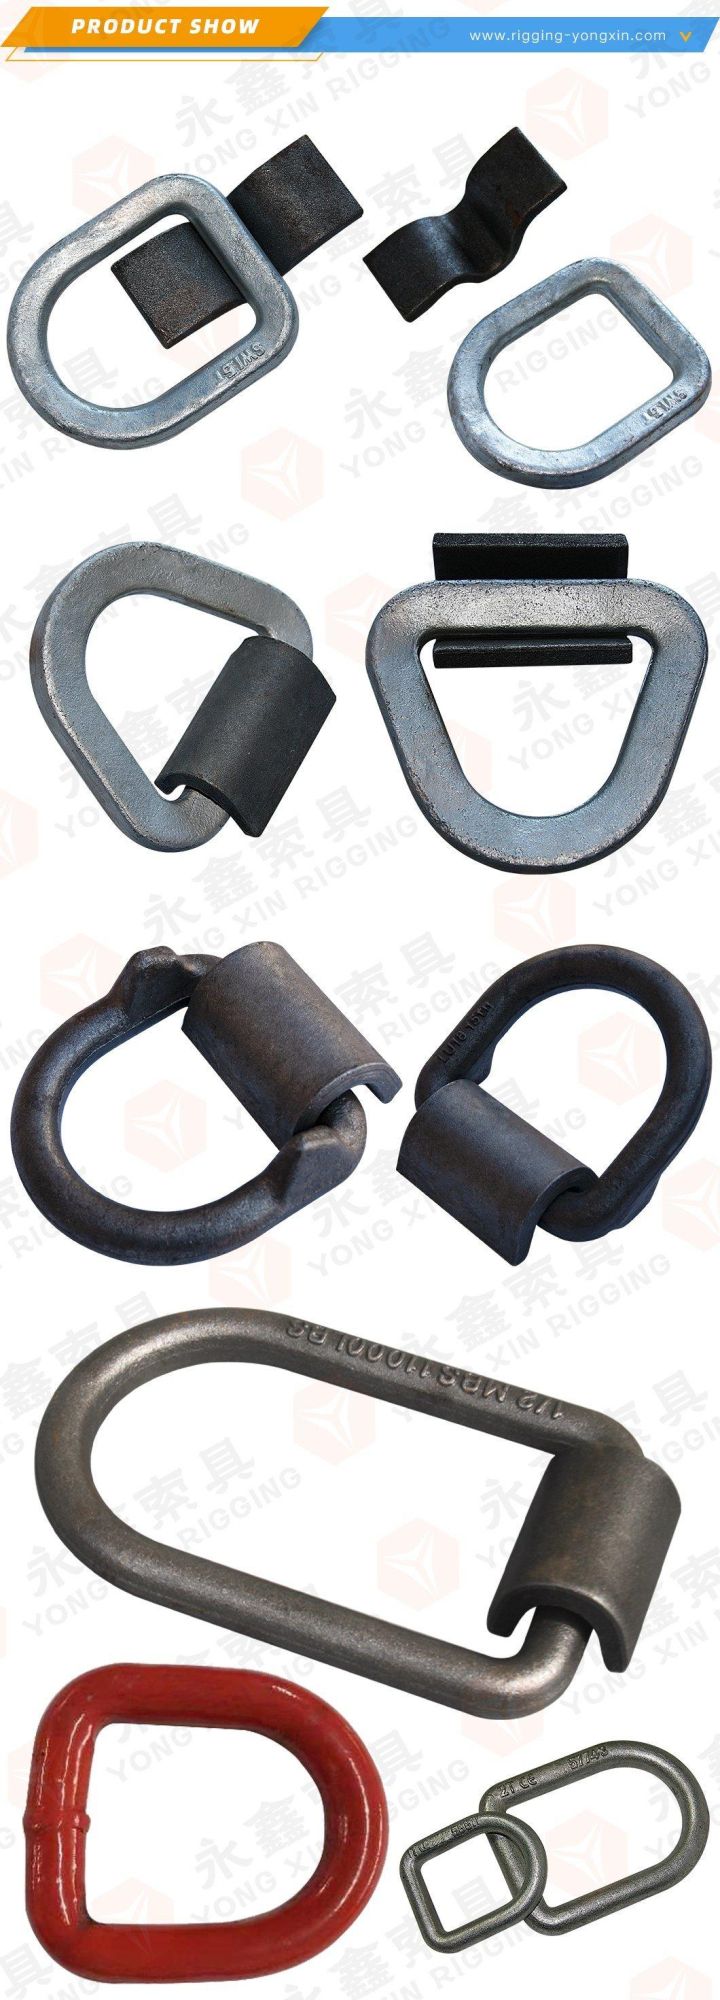 Factory Price High Quality Lashing D Ring with Supporting Point|Customized Lashing D Ring